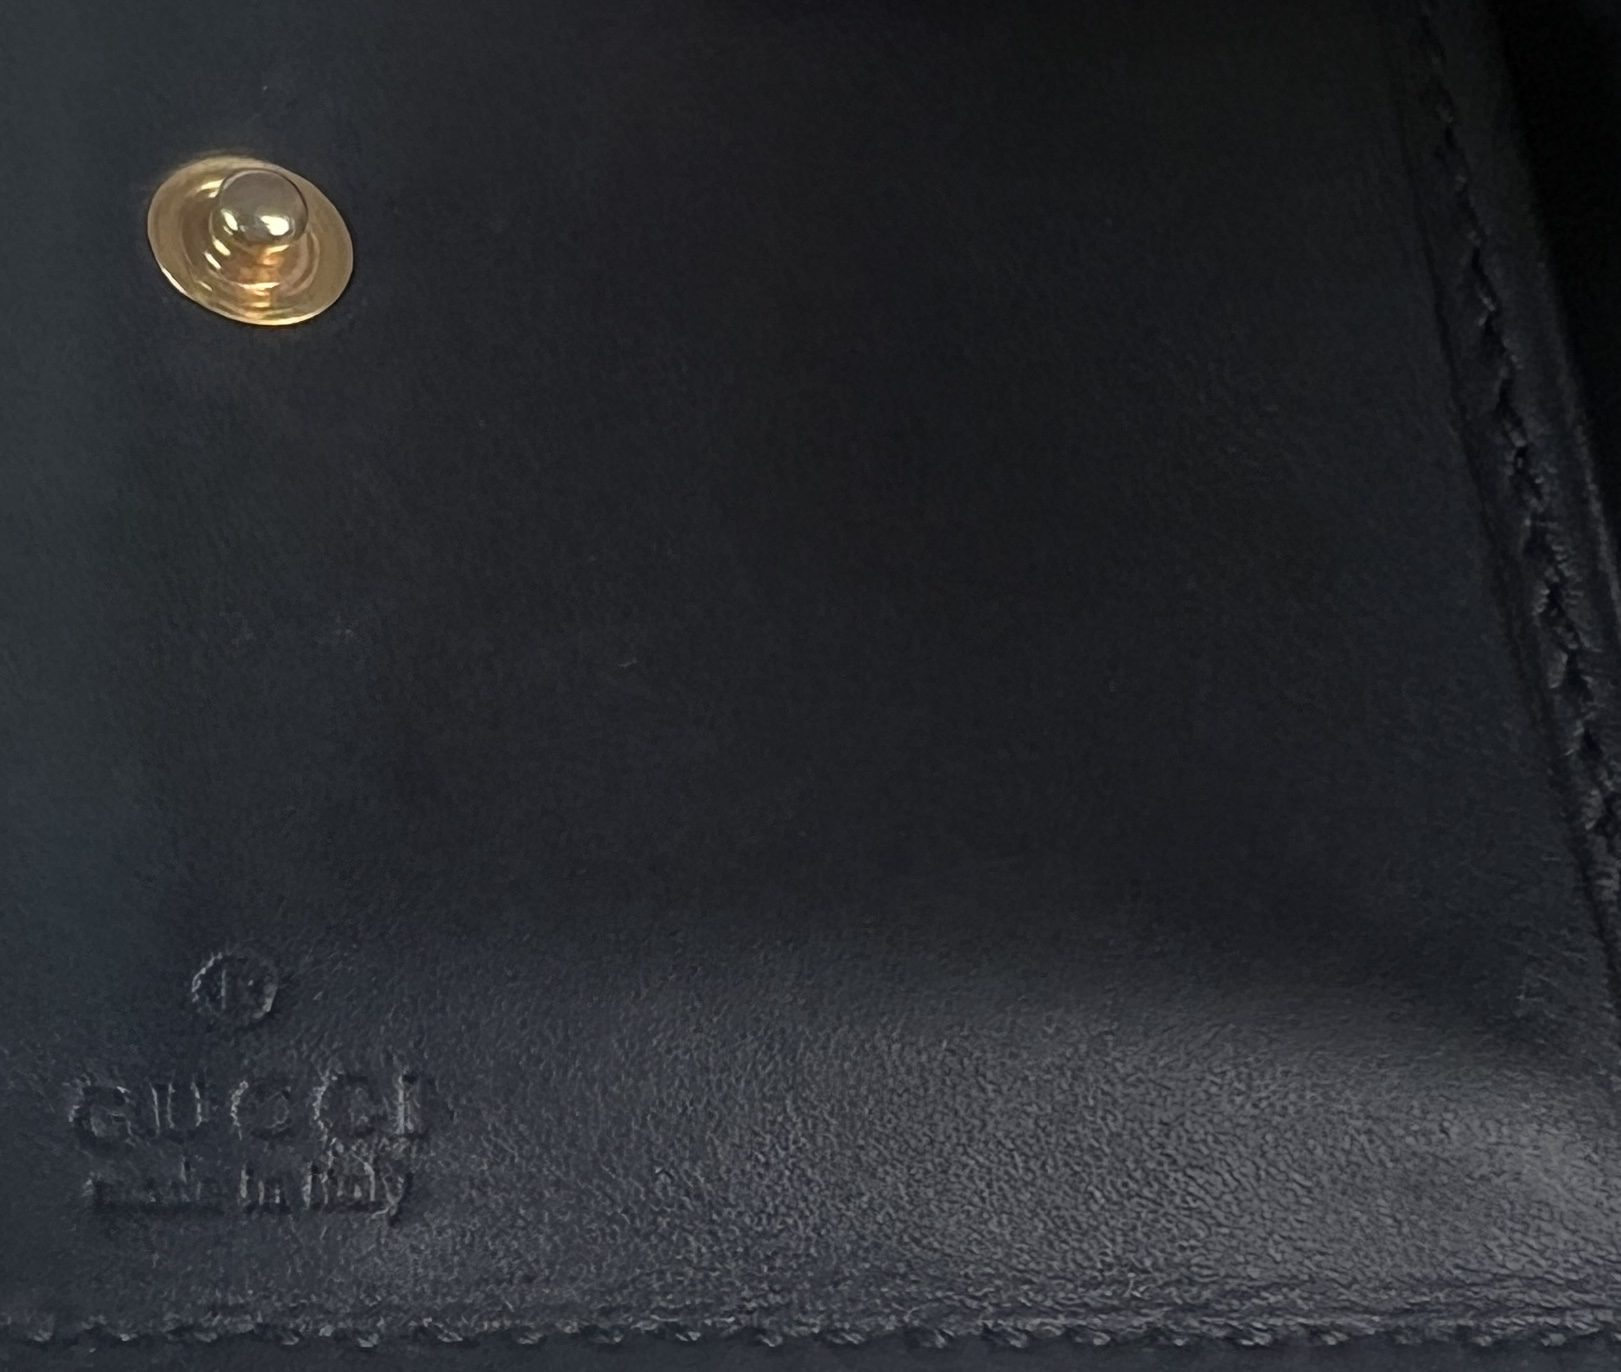 Gucci Microguccissima Taupe Leather Wallet With ID Window - A World Of  Goods For You, LLC